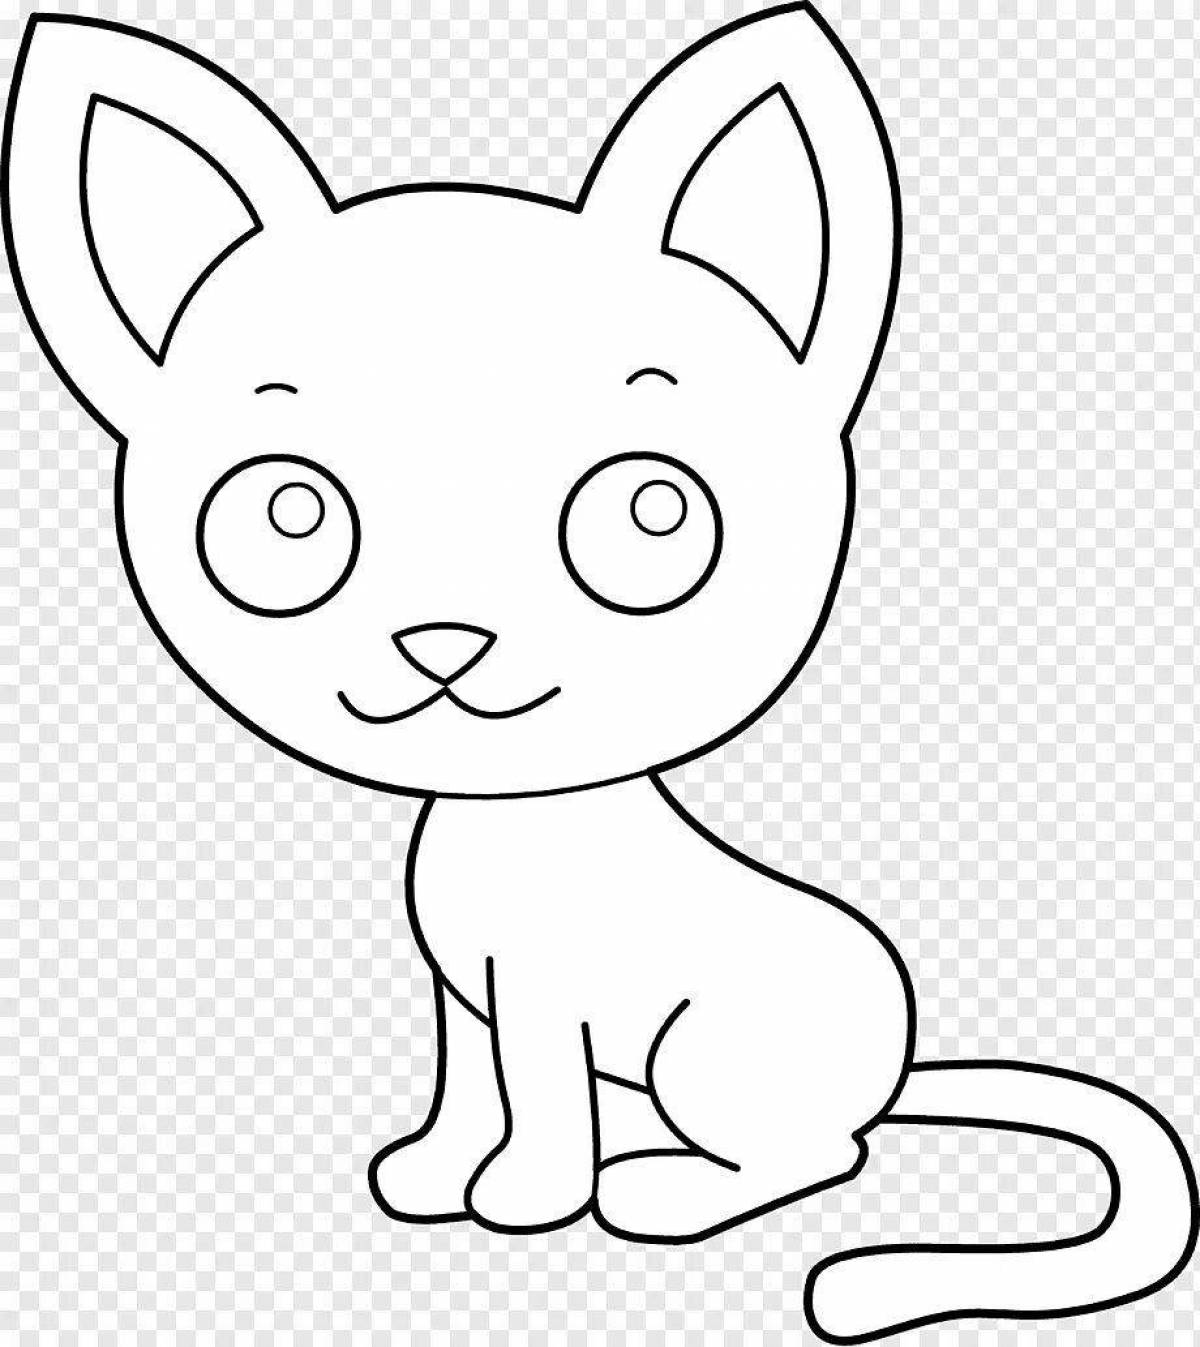 Coloring pages for kids with cute cat